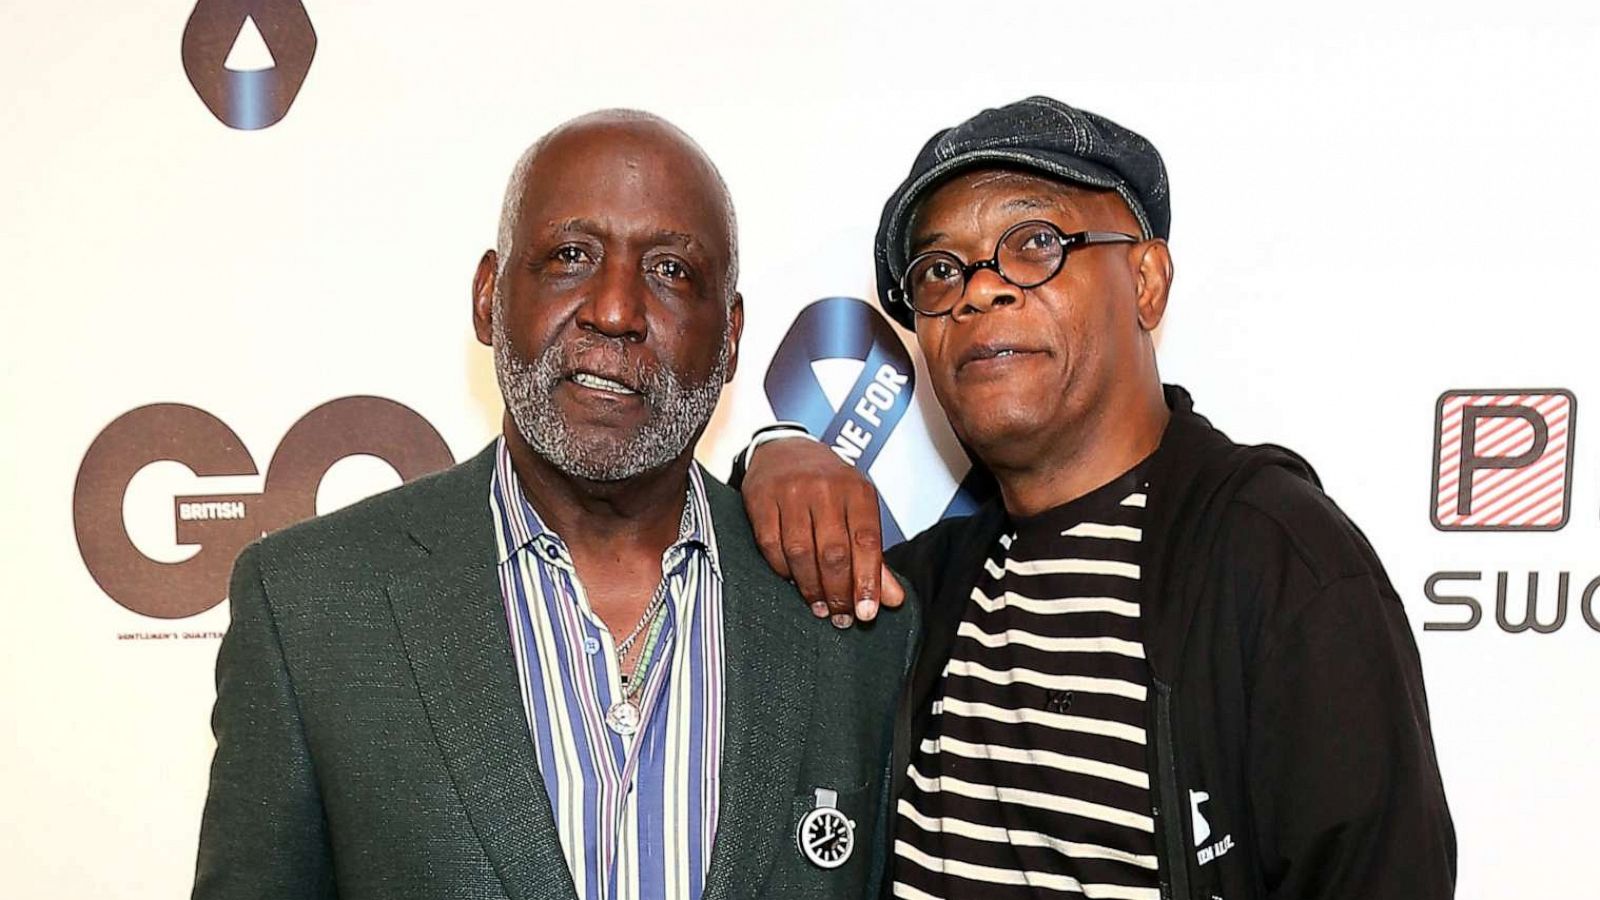 He was simply the best': Richard Roundtree, the actor who played Shaft, has  died at 81